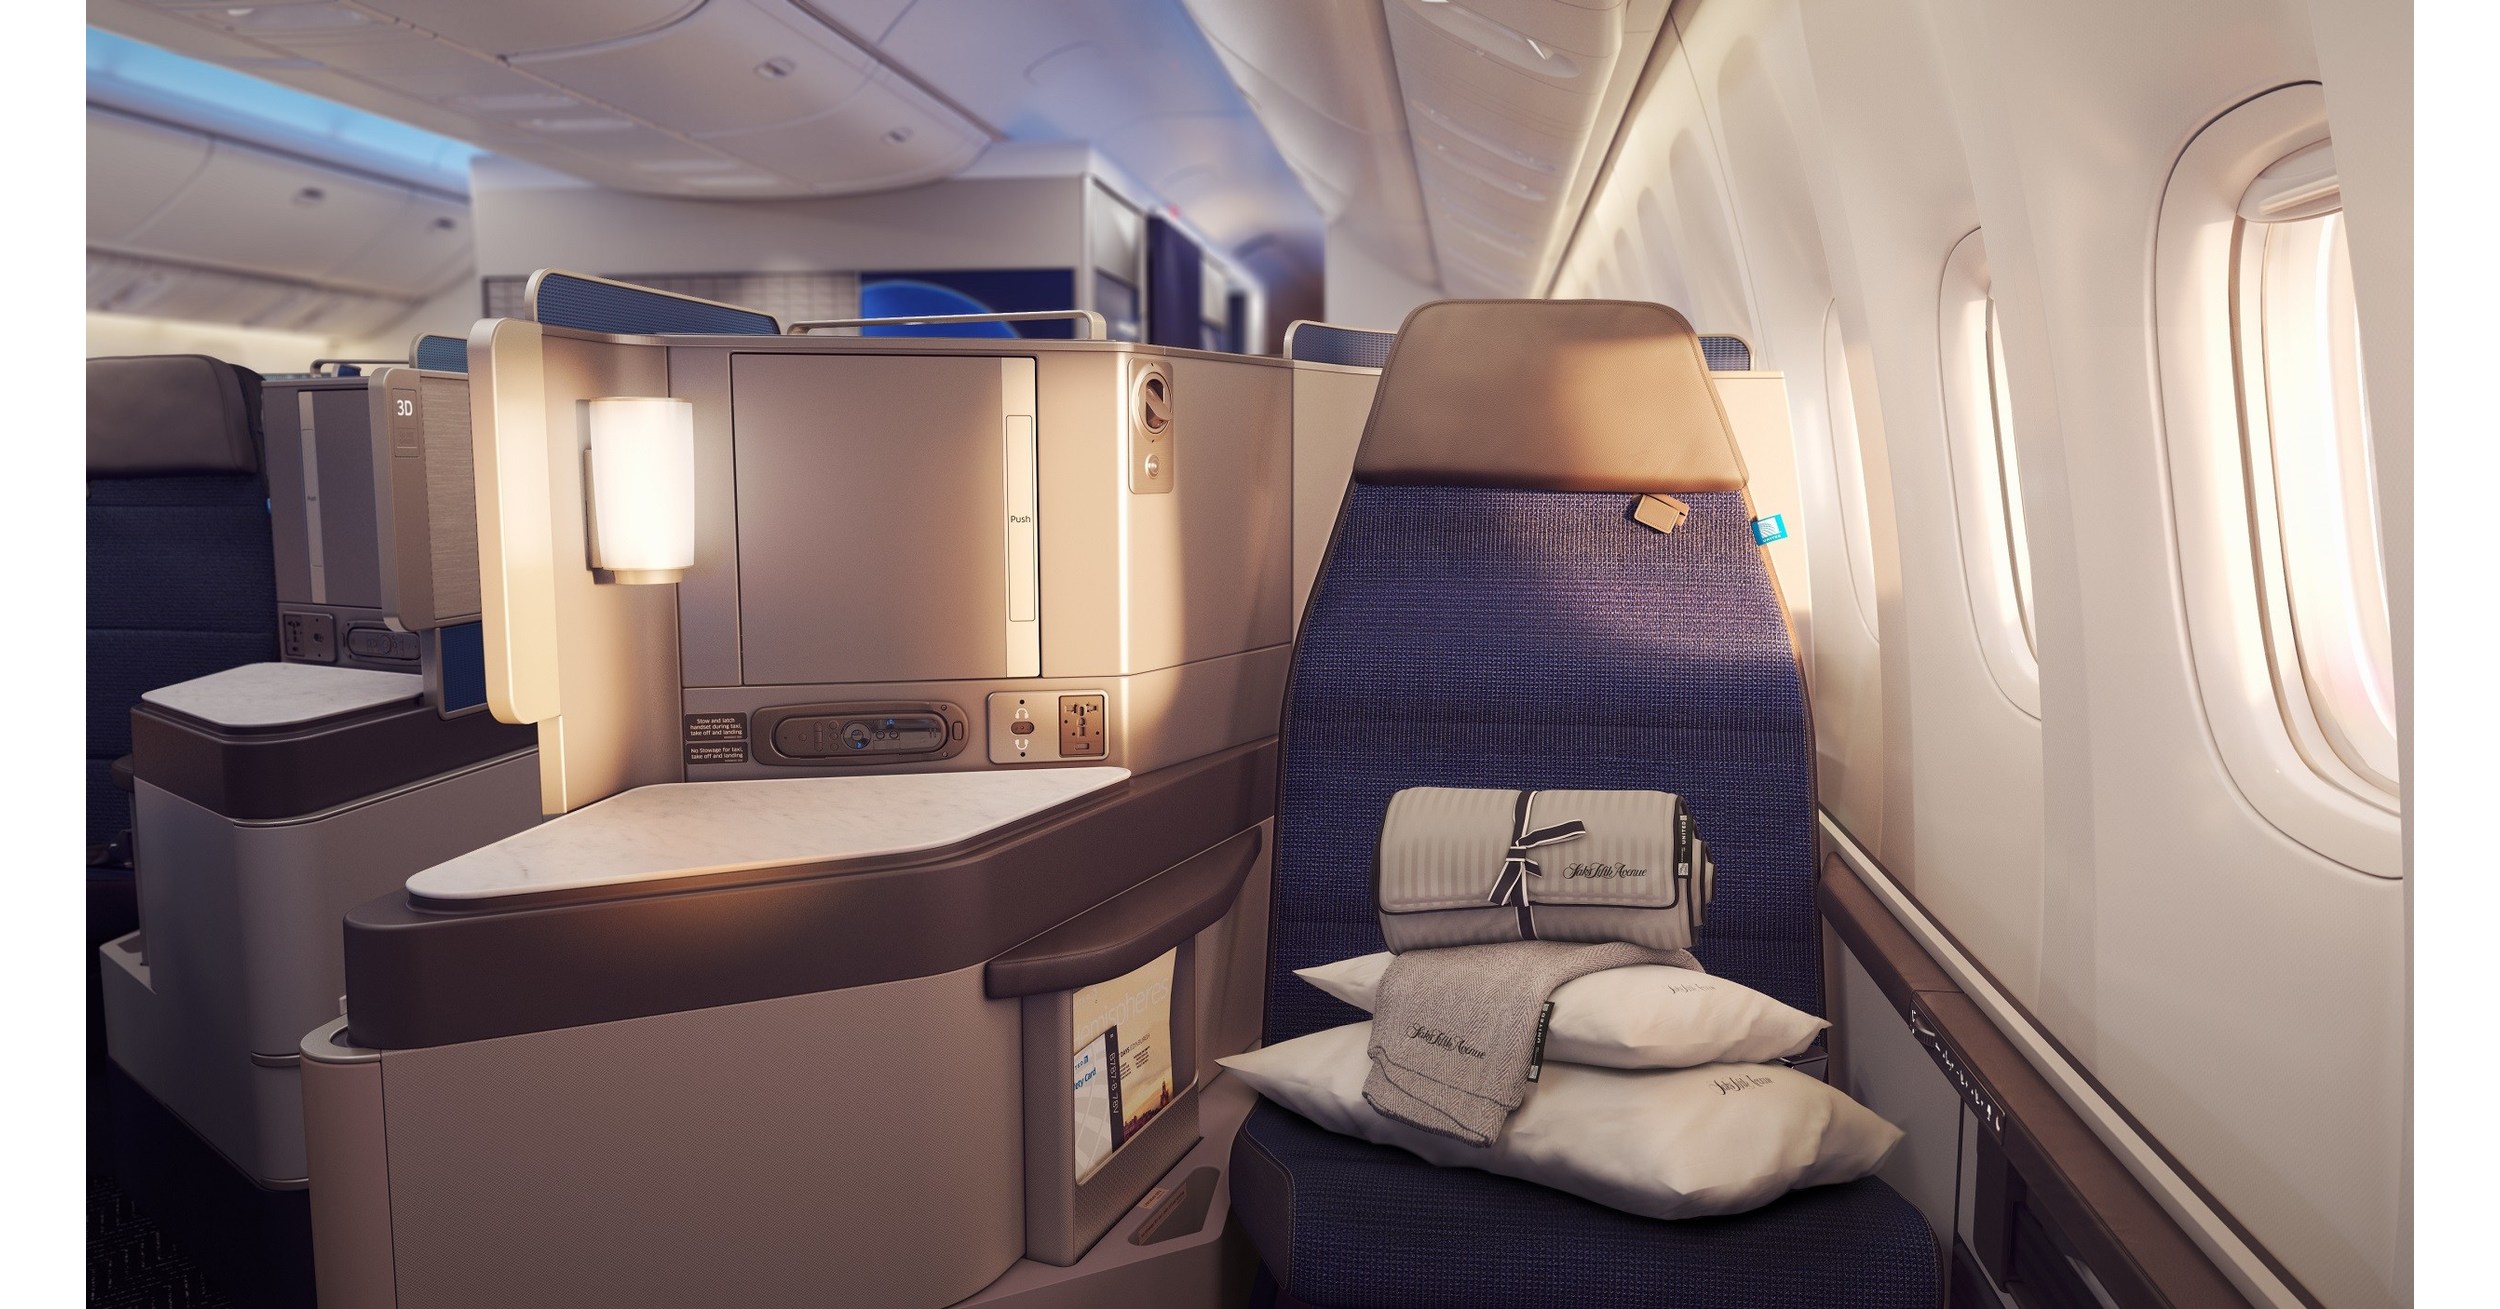 United Airlines Introduces Boeing 777 300er To Additional Routes